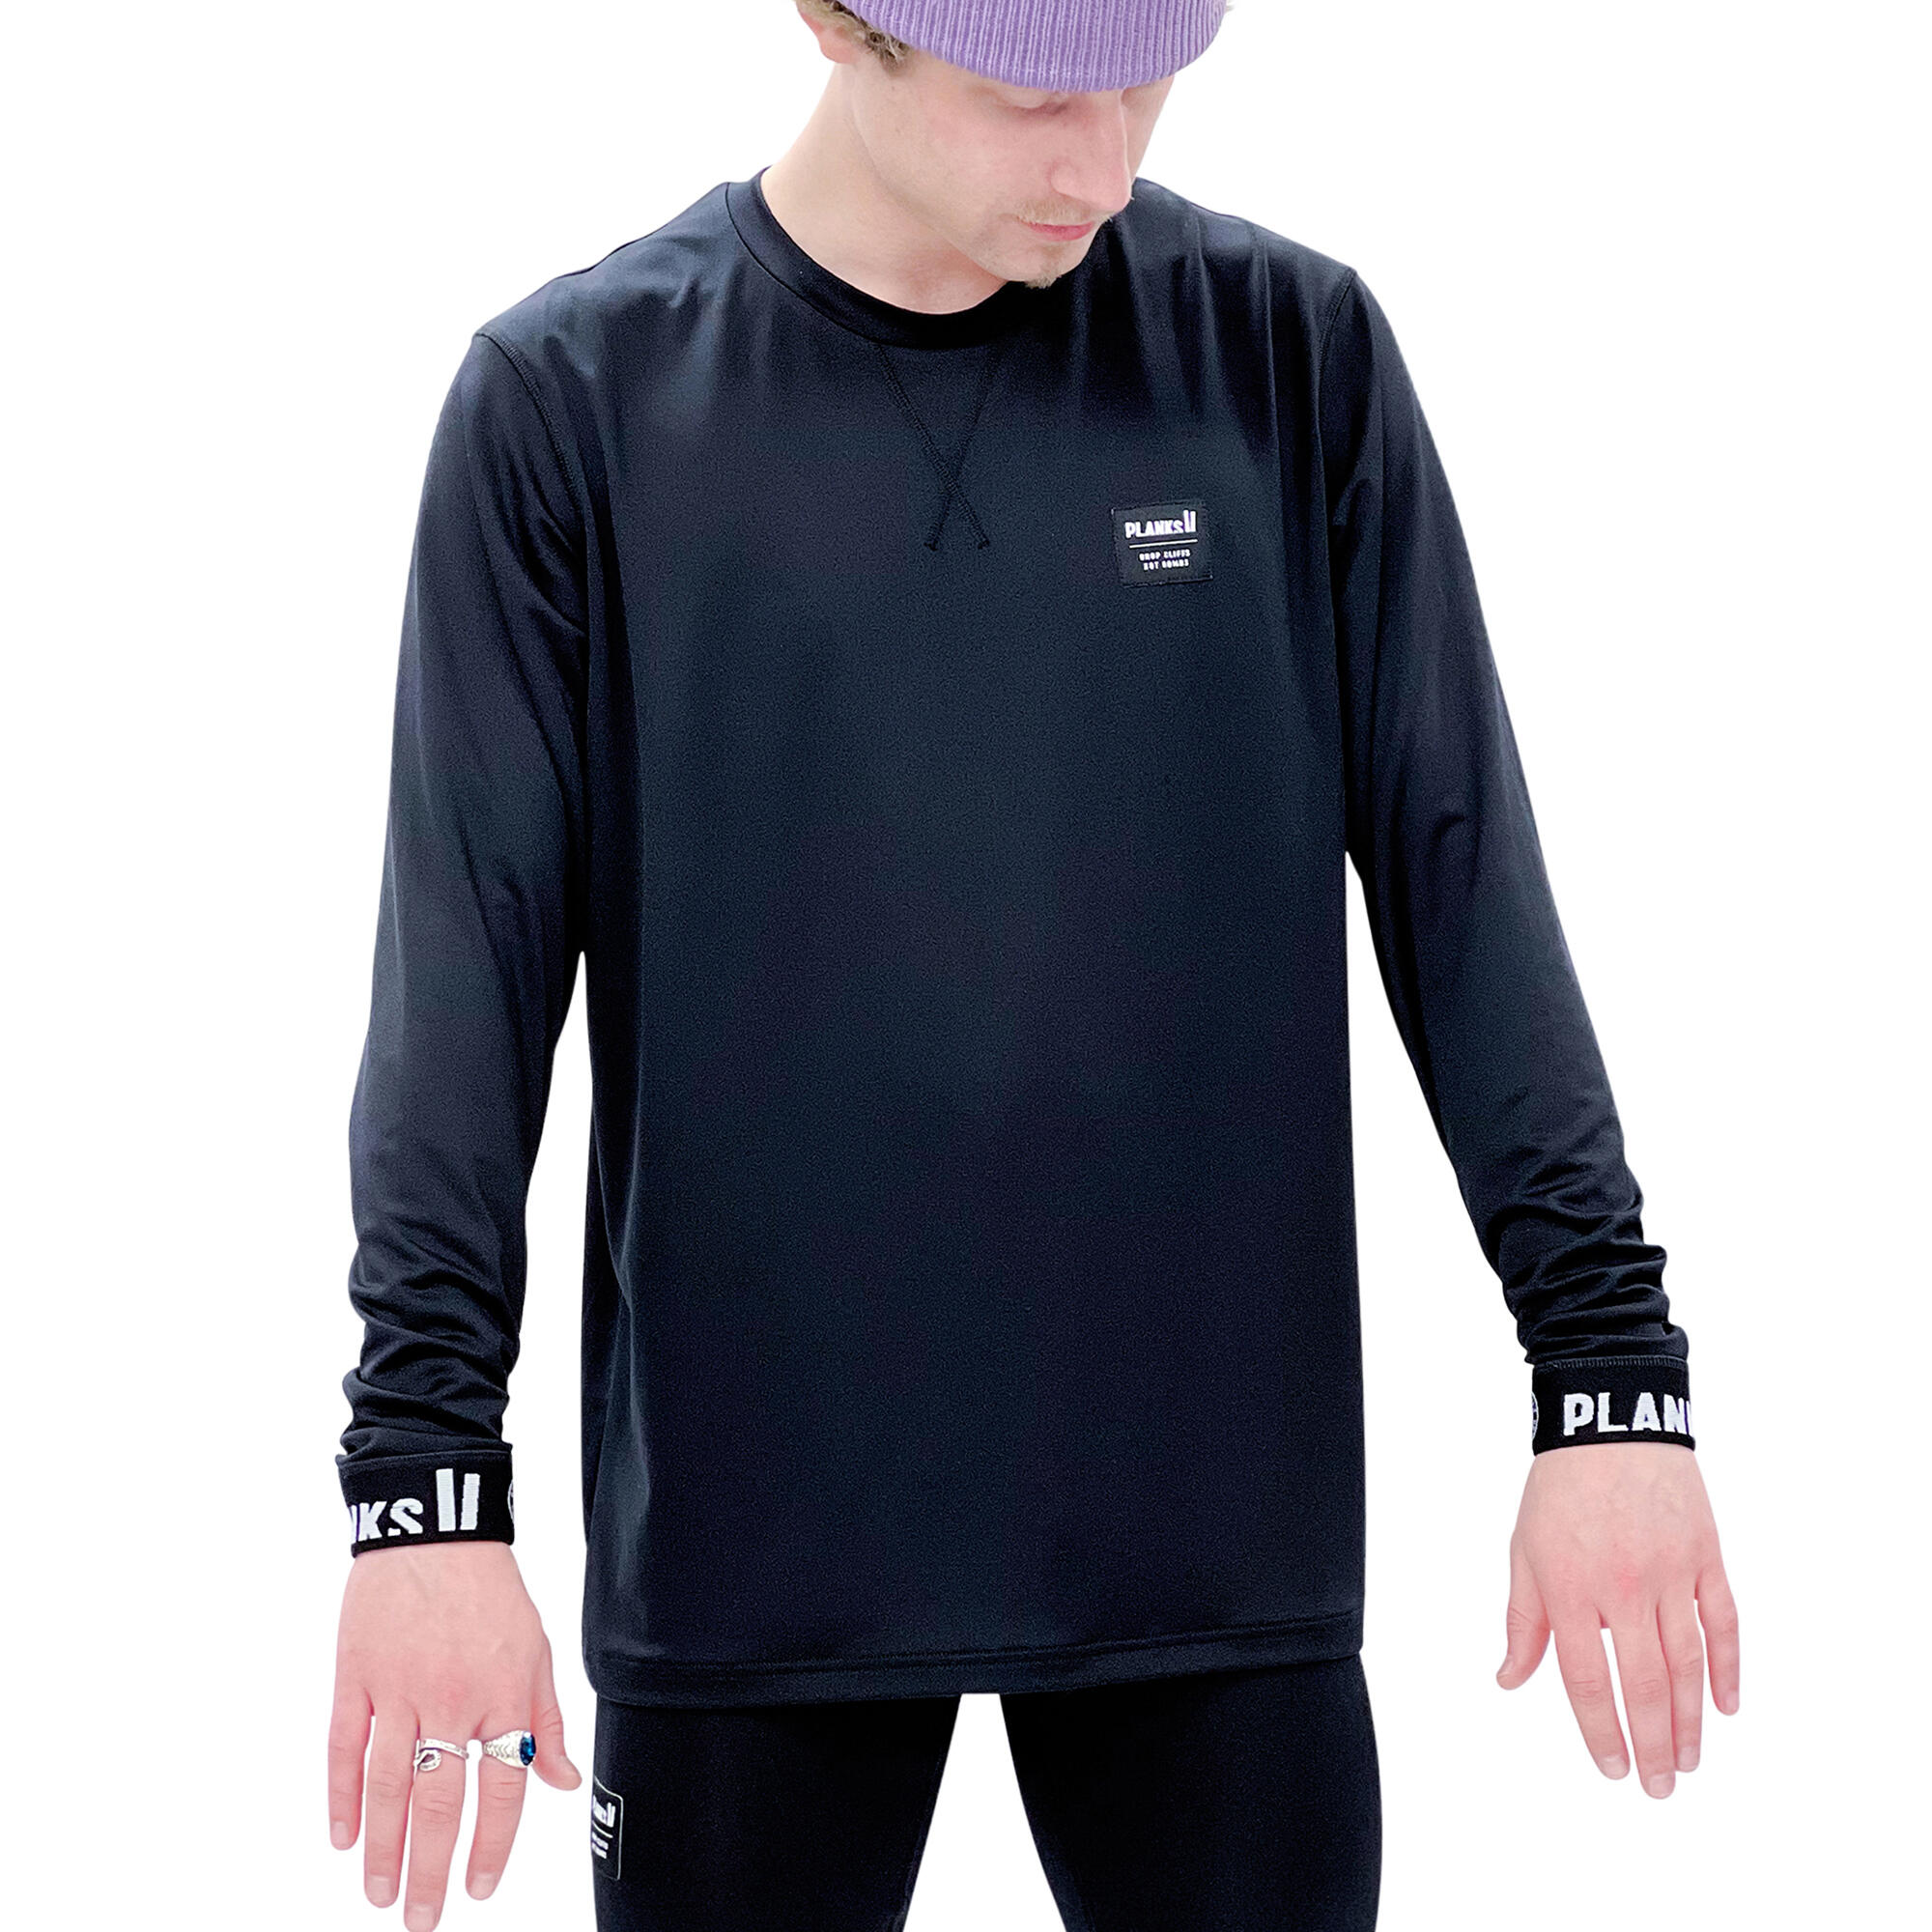 Planks Men's Fall-Line Base Layer Top in Black - Long Sleeve Fitness T-Shirt 1/3